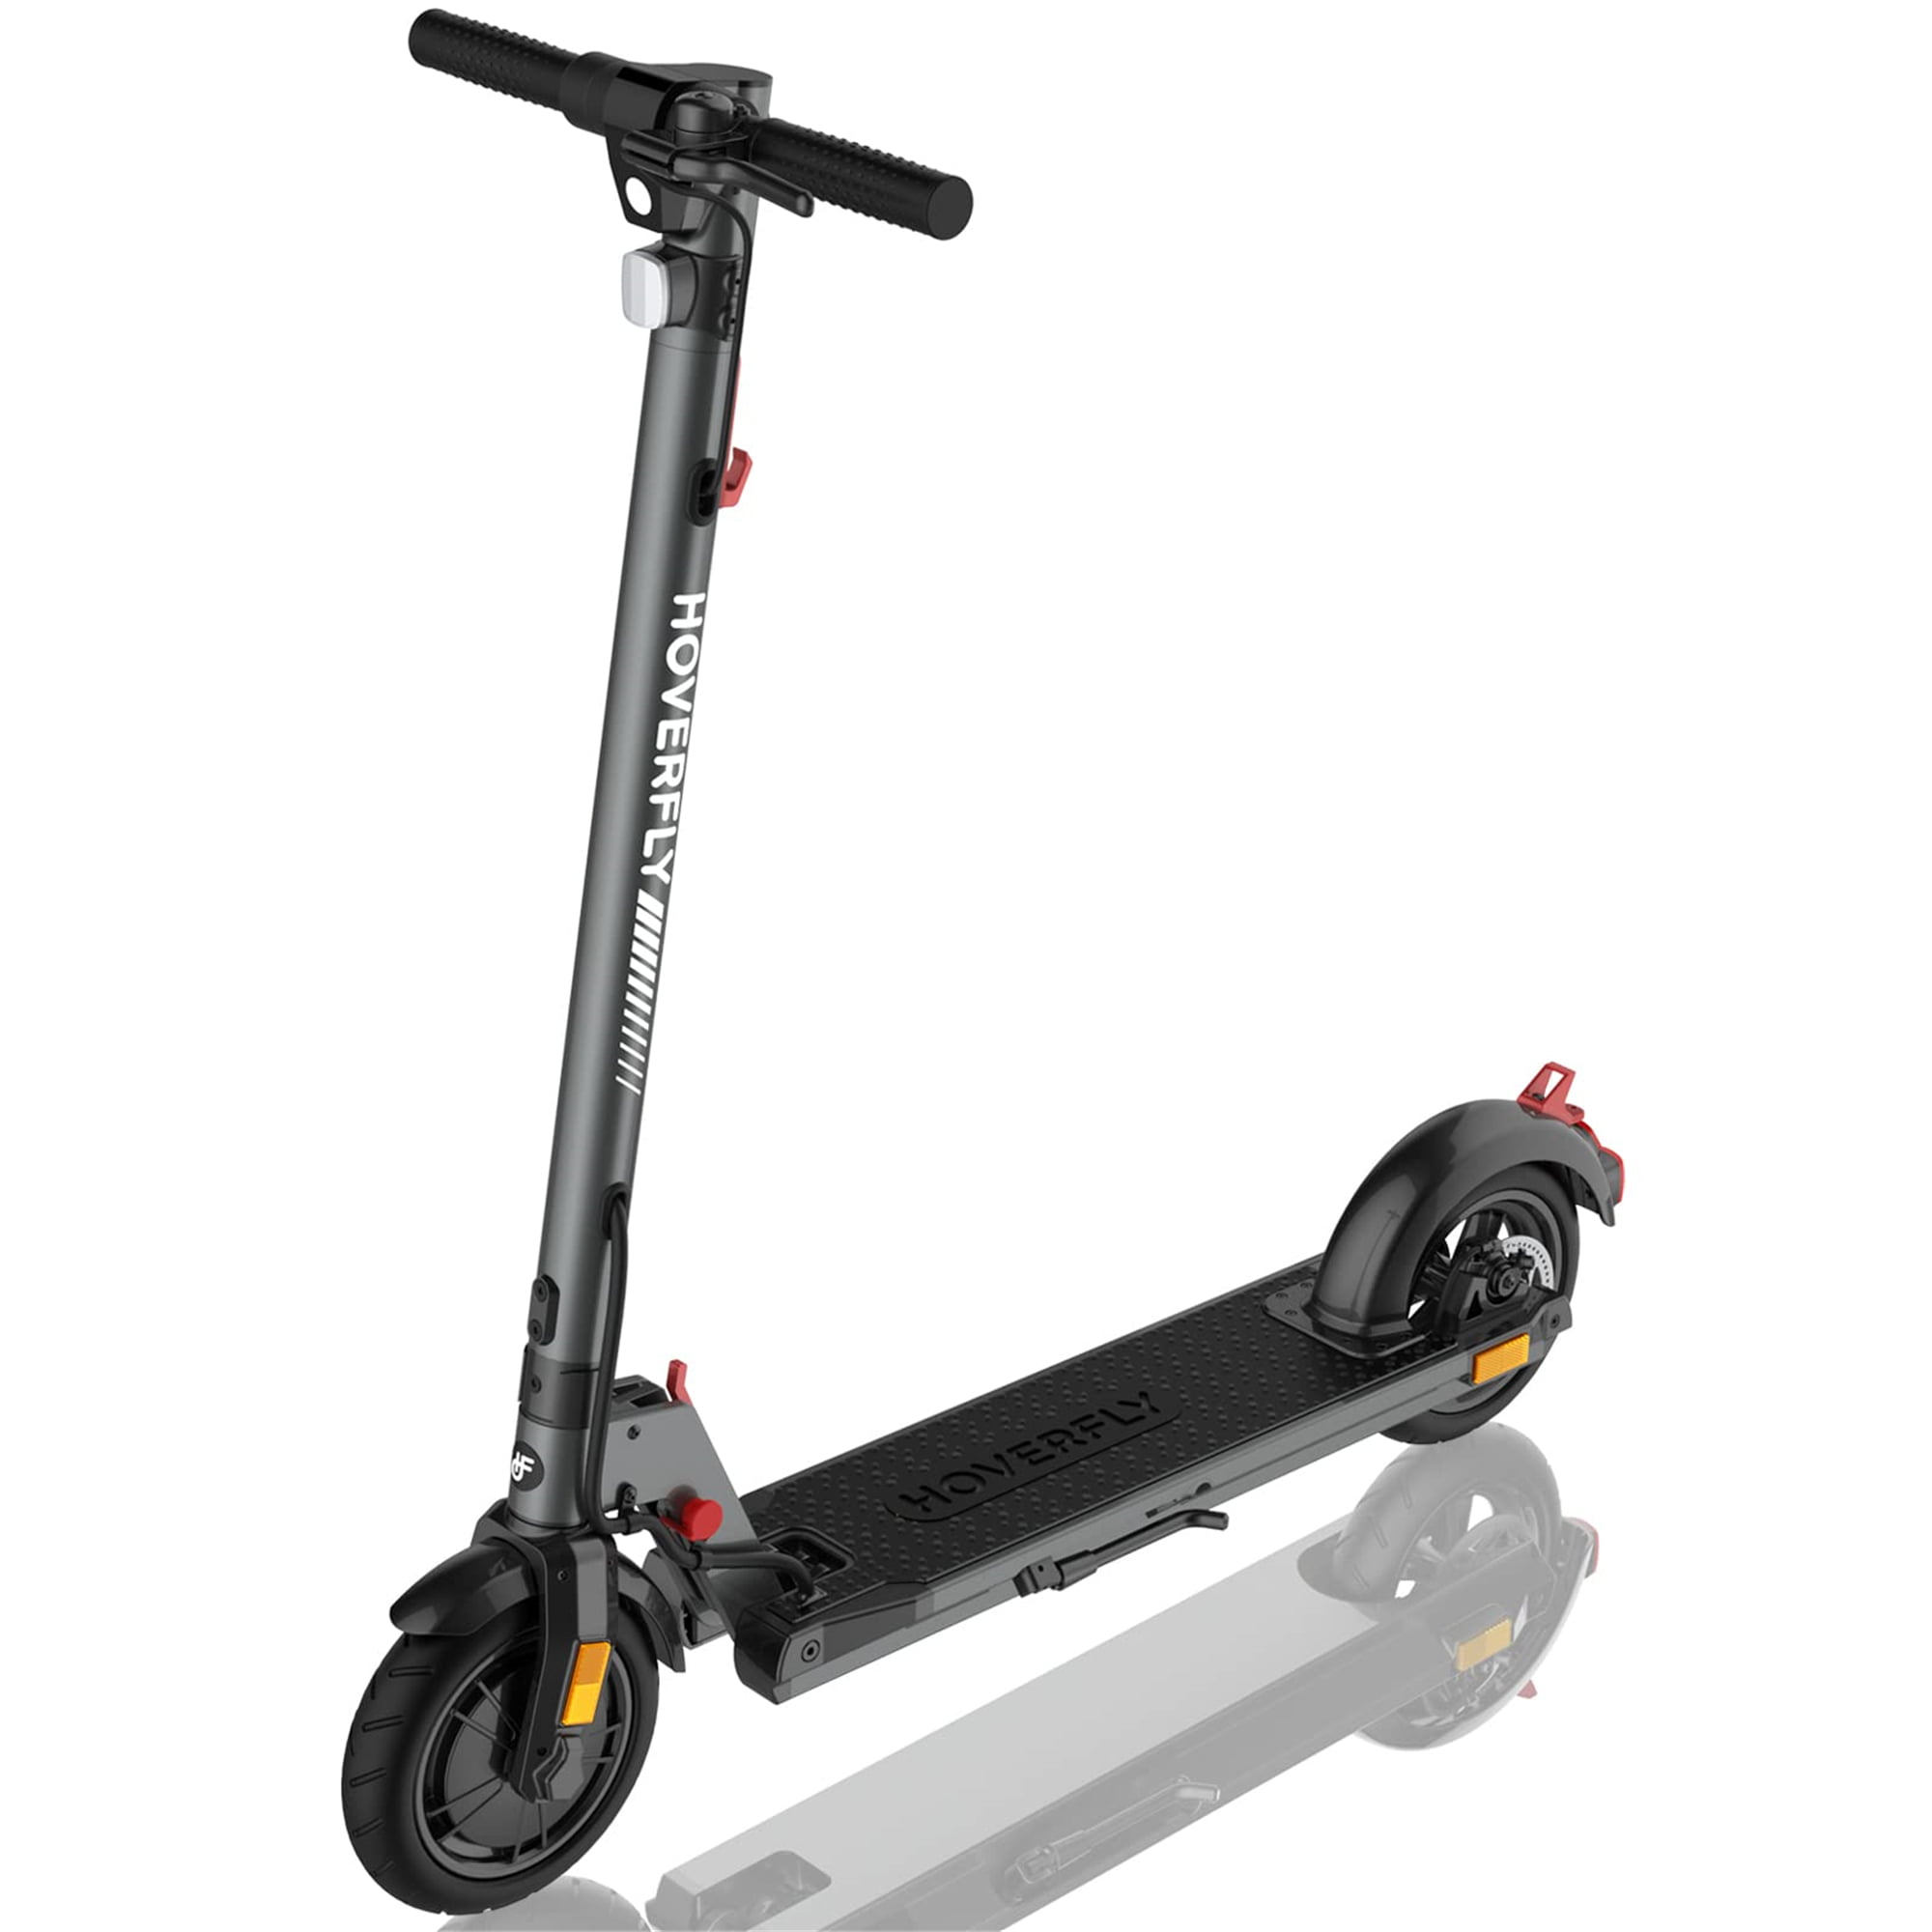 Urbanglide Ride 100 Max Electric Scooter Black